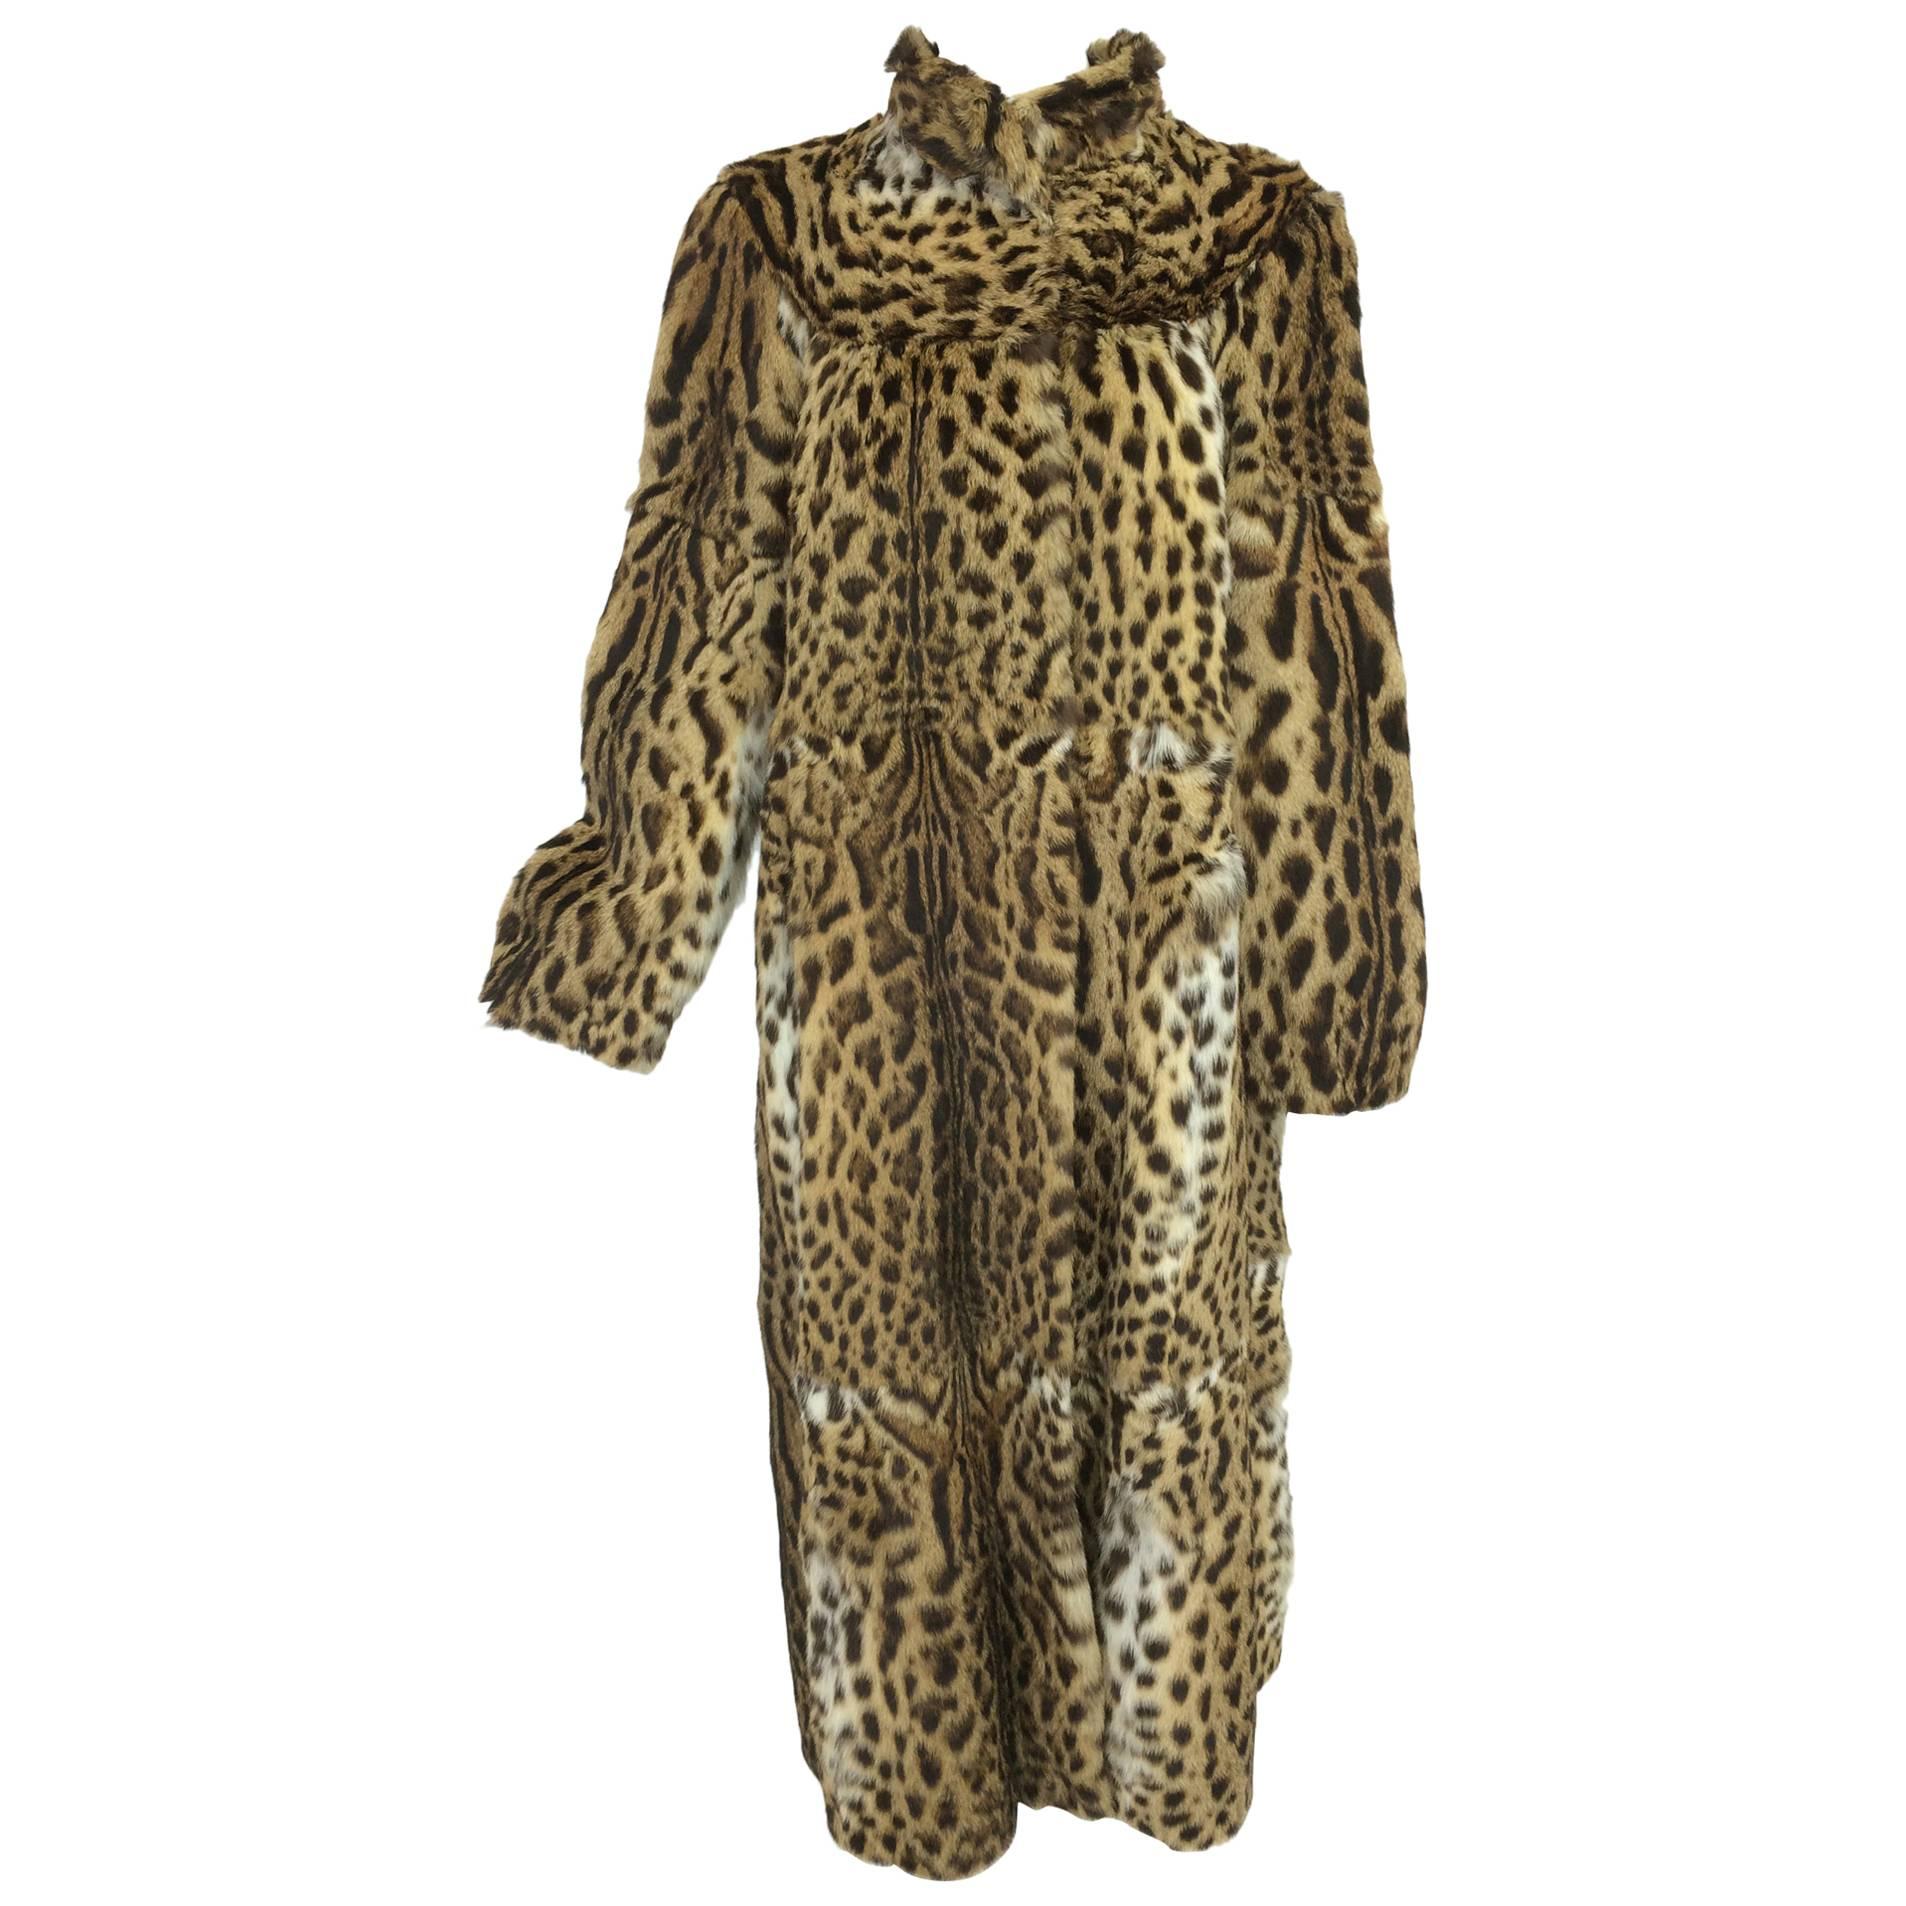 1970s Full Length Spotted Fur Coat Yorn Boutique Germany For Sale